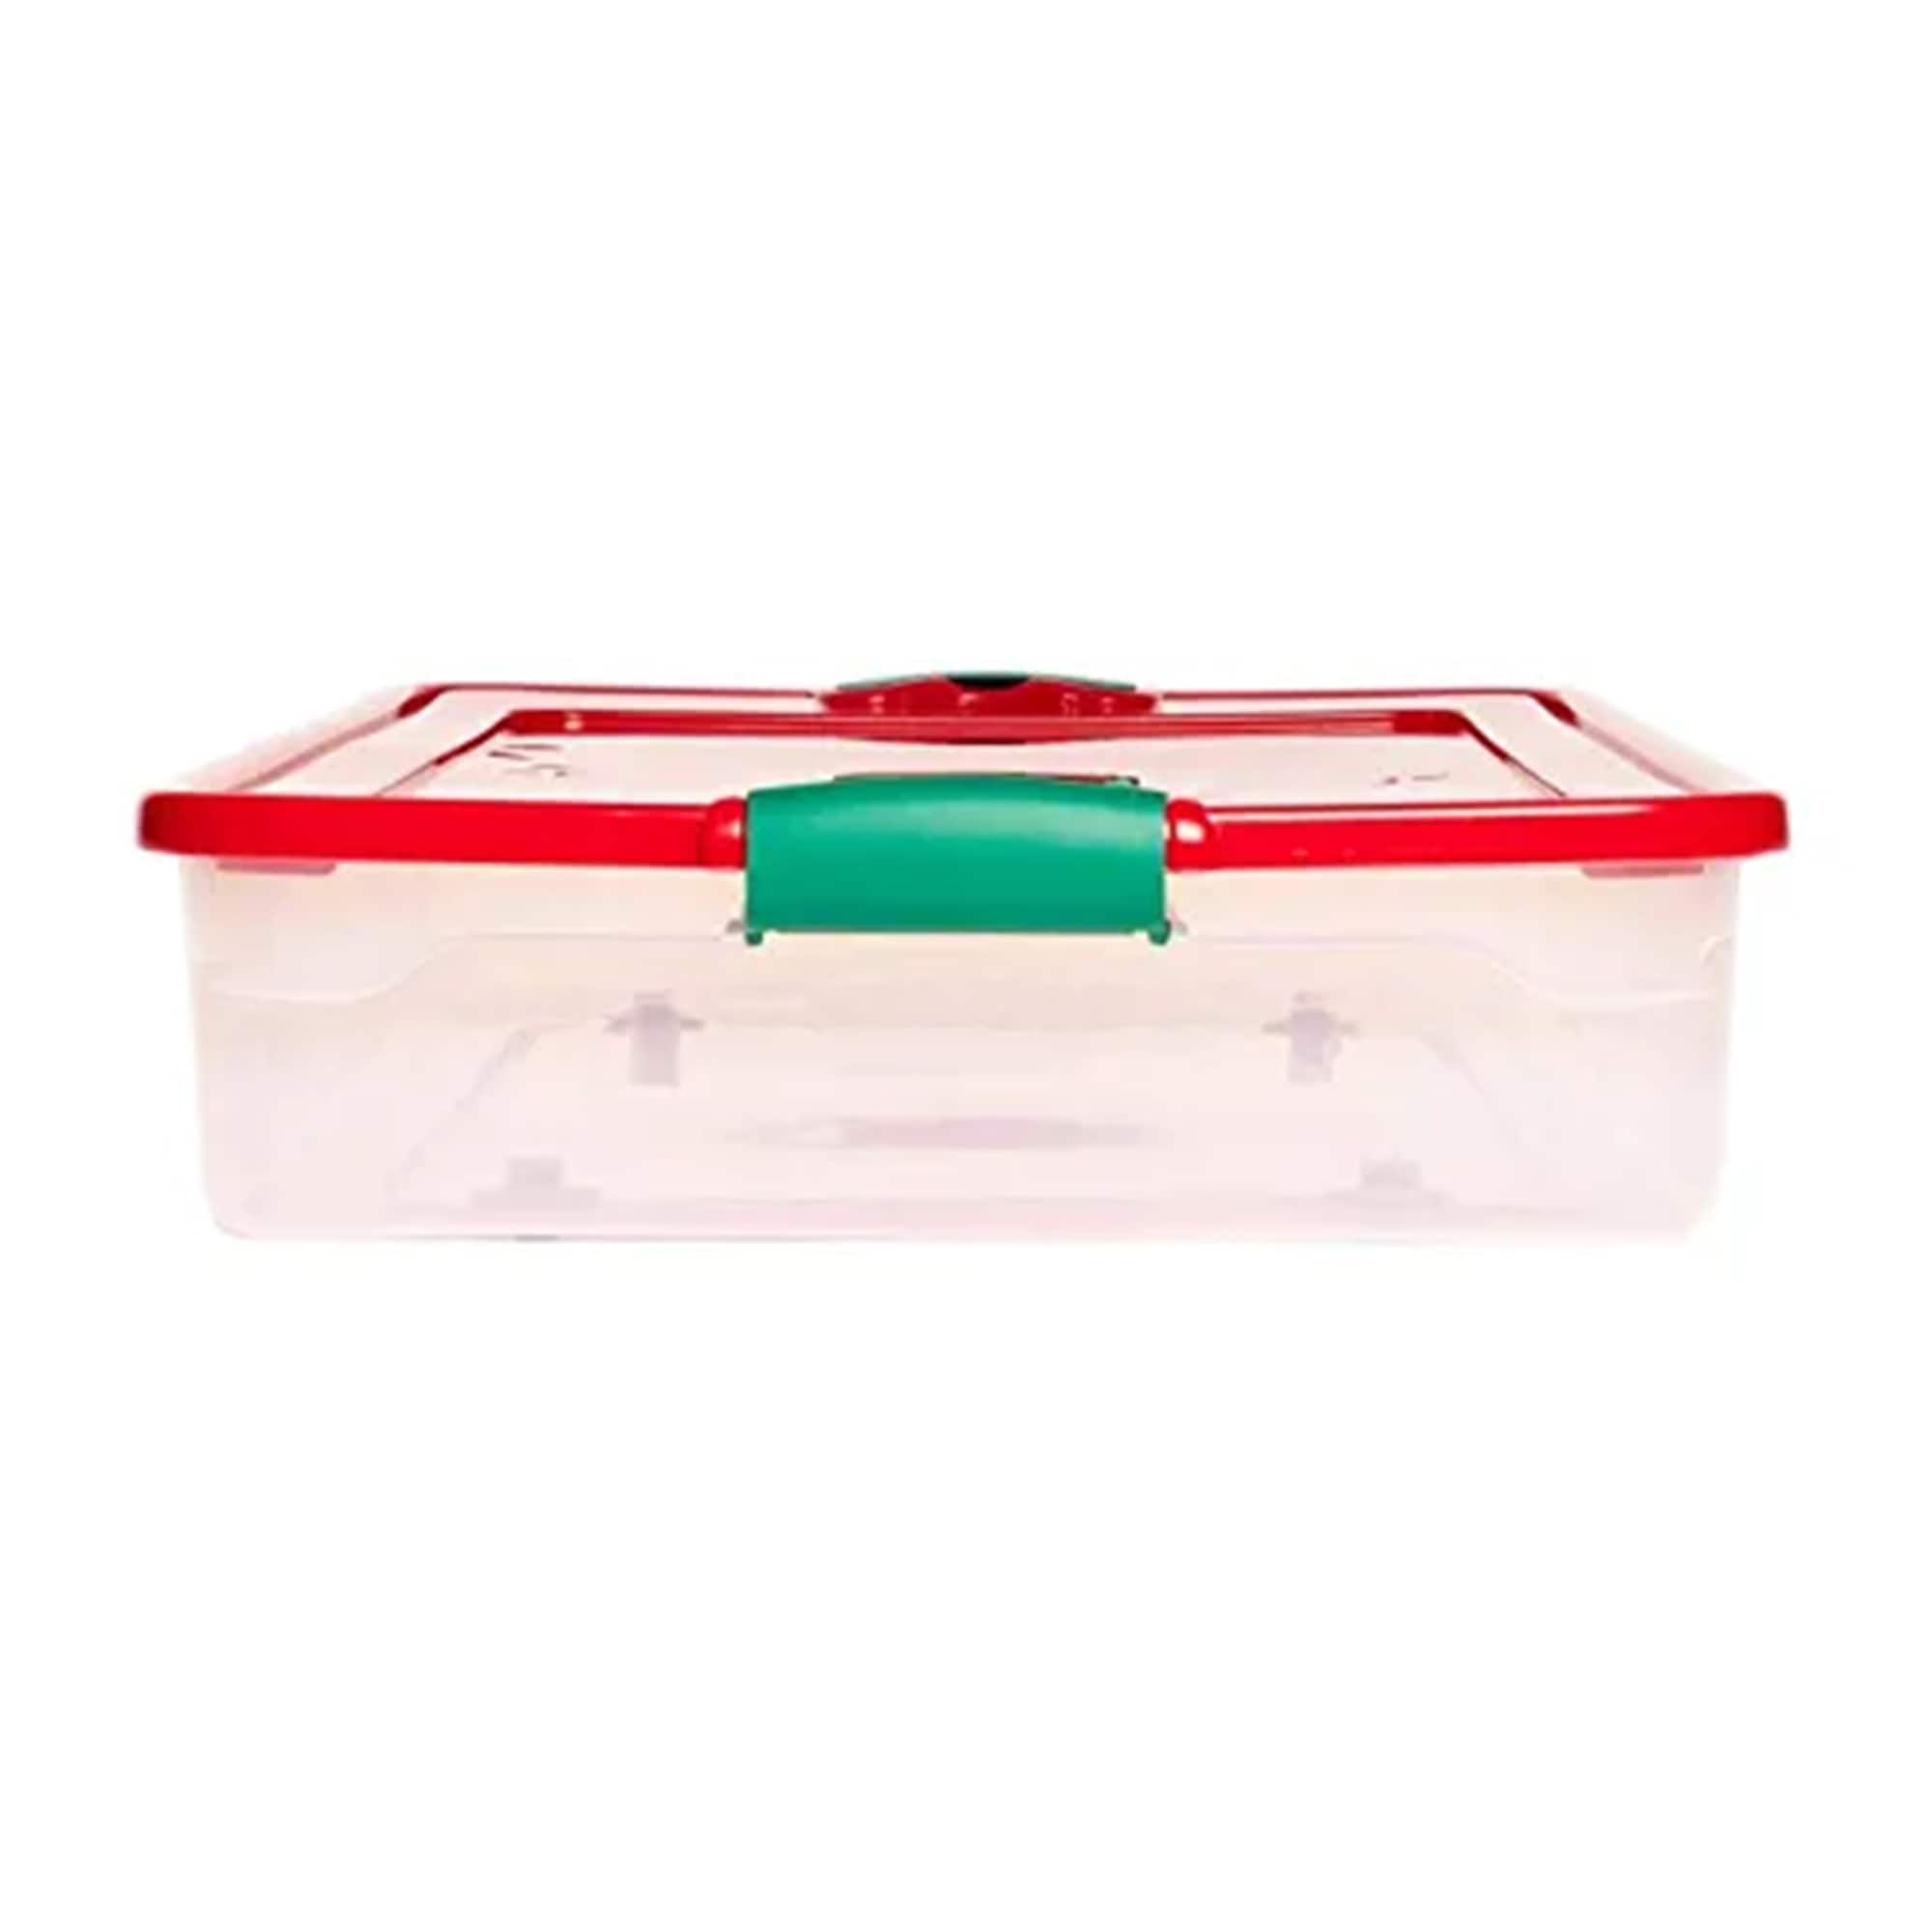 https://ak1.ostkcdn.com/images/products/is/images/direct/451531f39e1eda5de8f5d5fb5cfbea8d8e8a7865/HOMZ-60-Quart-Latching-Holiday-Underbed-Storage-Container-Box%2C-Clear-%282-Pack%29.jpg